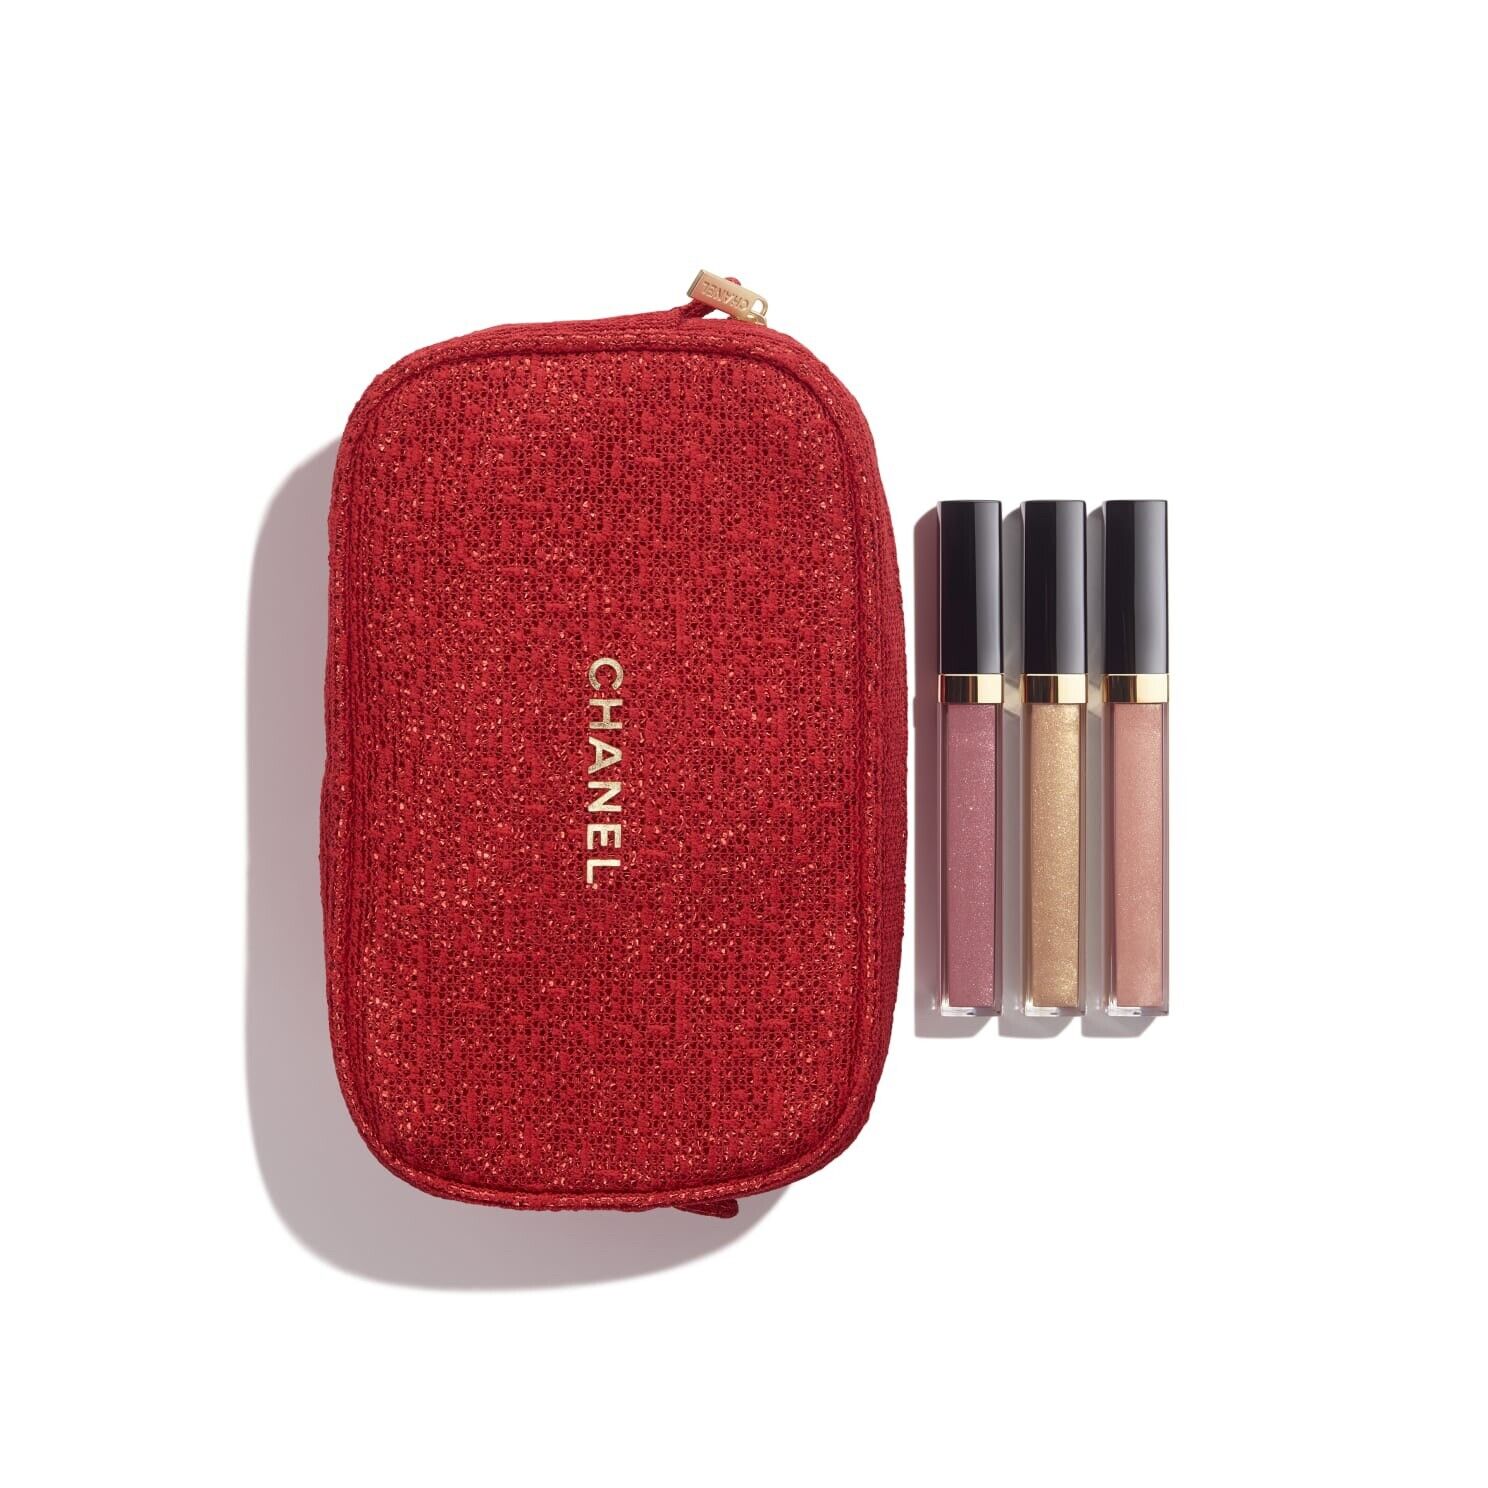 NEW CHANEL Lip Gloss Trio Holiday Gift Set With Authentic CHANEL